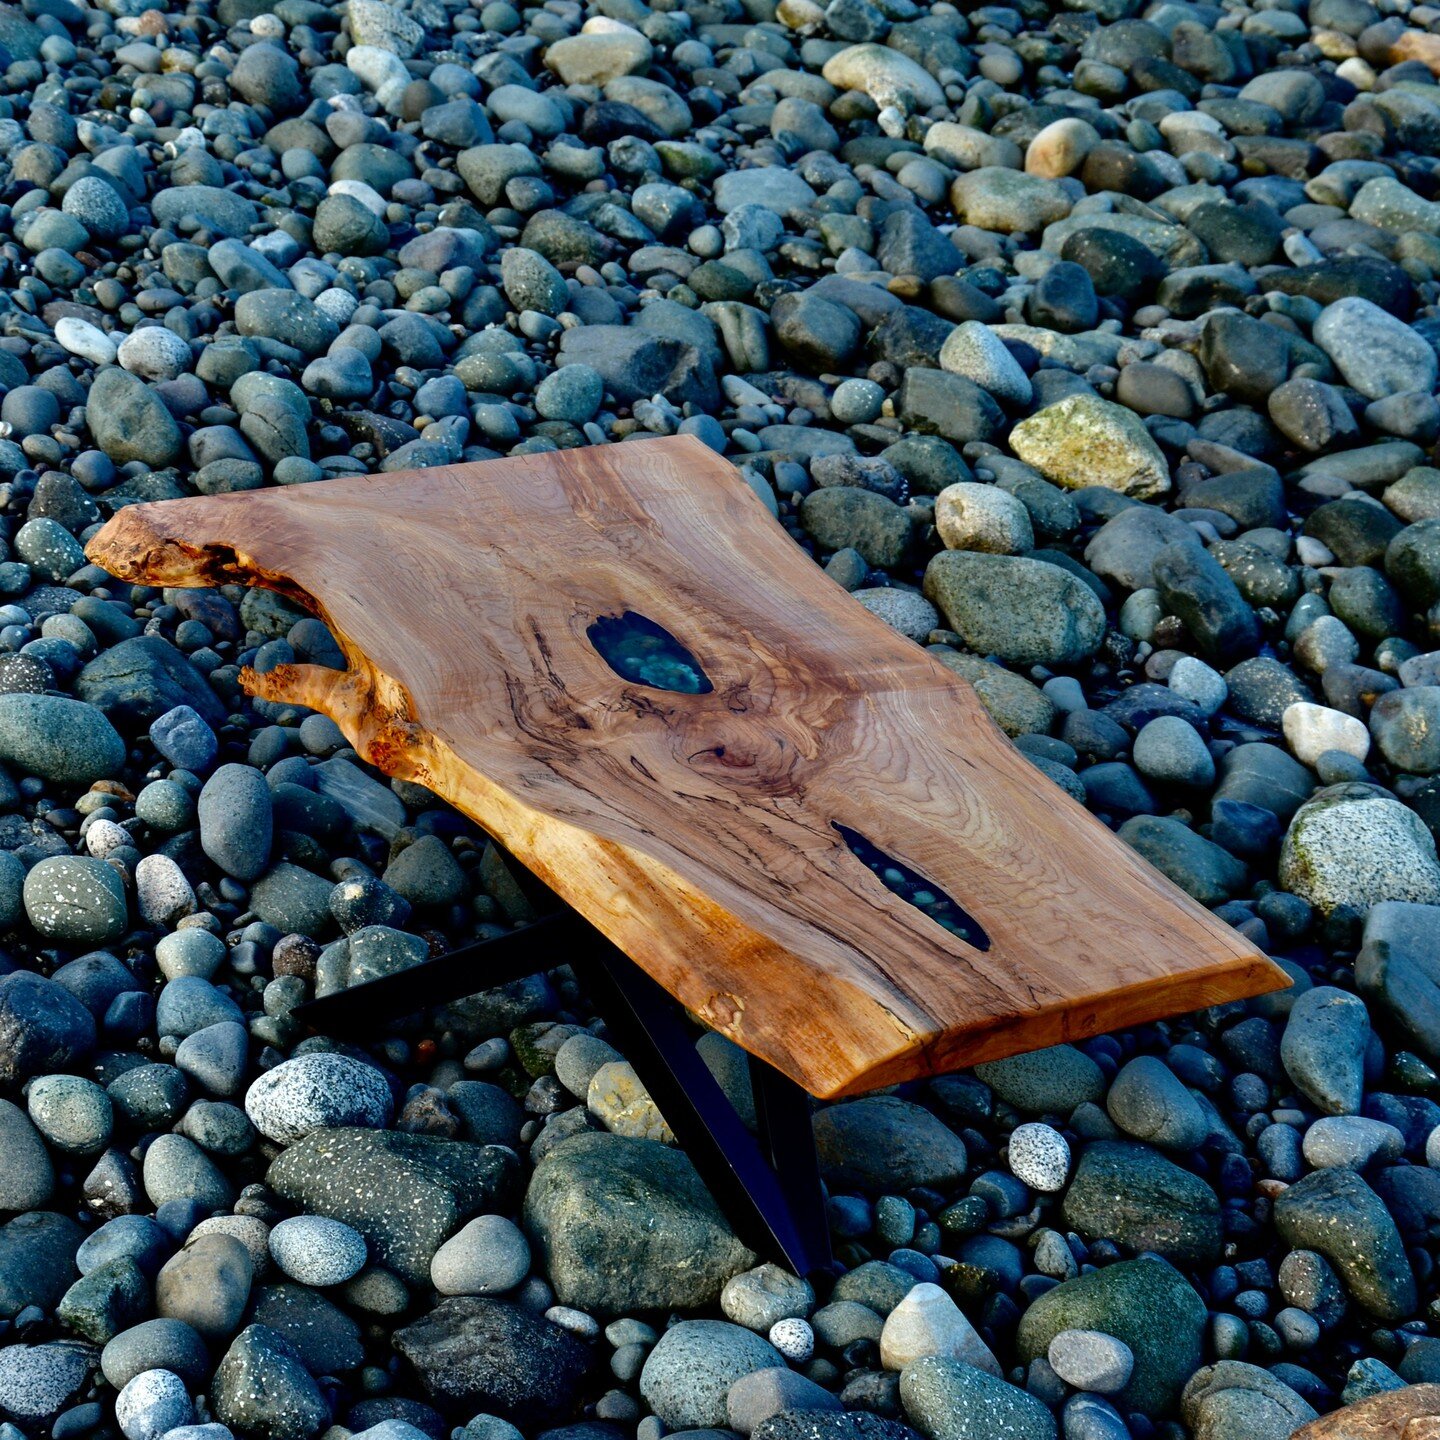 Stunning spalted maple coffee table, custom made for a client and inspired by the beach.

#liveedge #liveedgetable #liveedgefurniture #liveedgecoffeetable #maple #spaltedmaple #bigleafmaple #westcoast #beachhouse #woodworking #customwoodworking #wood